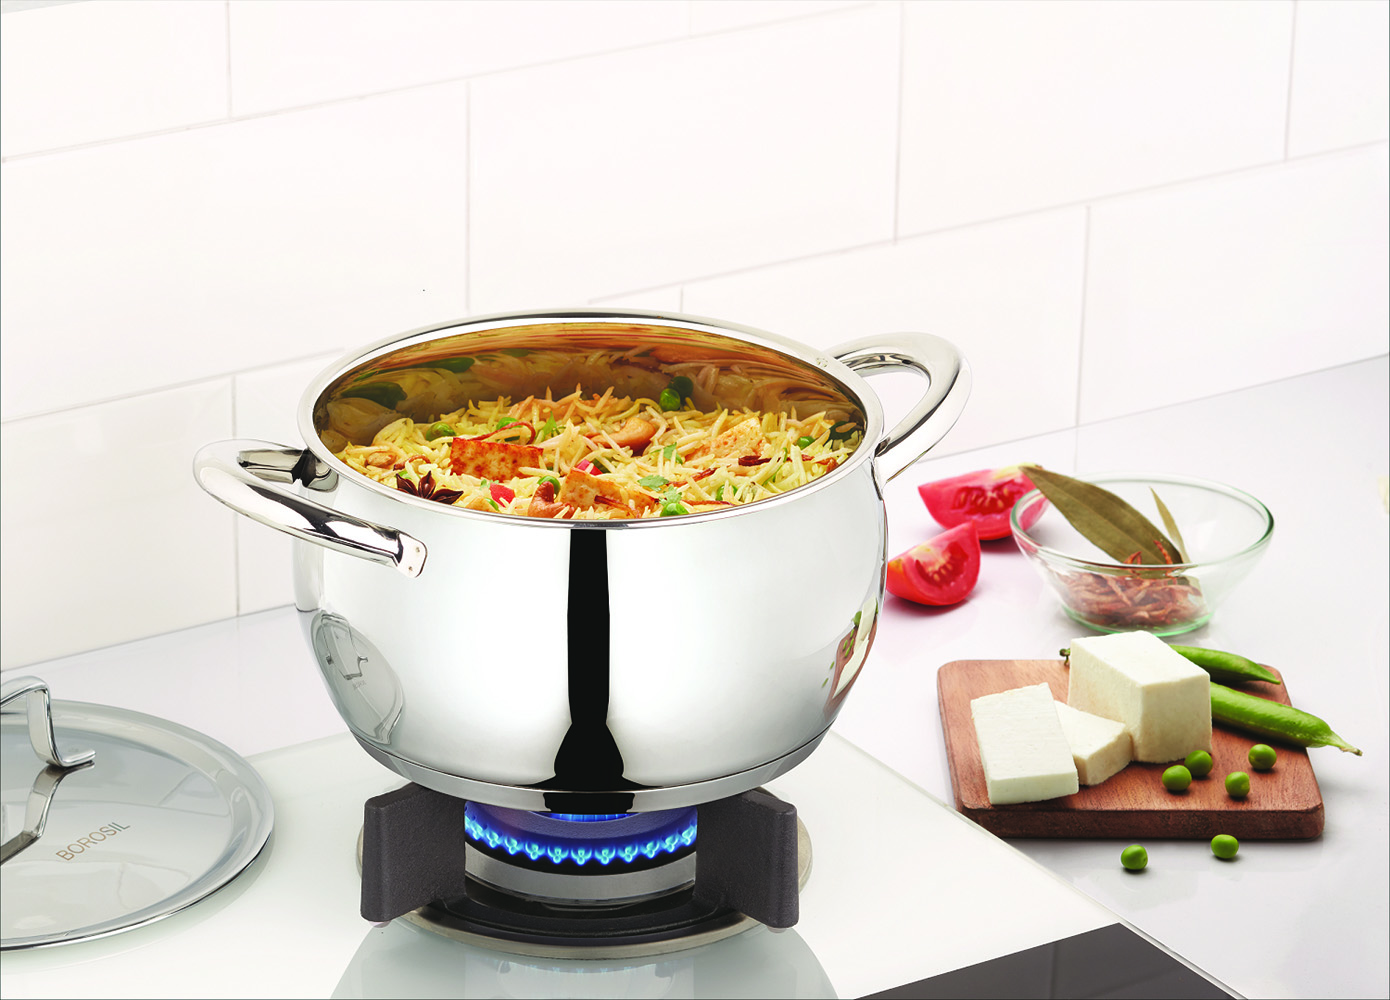 Borosil unveils its new collection of cookware and Cookware